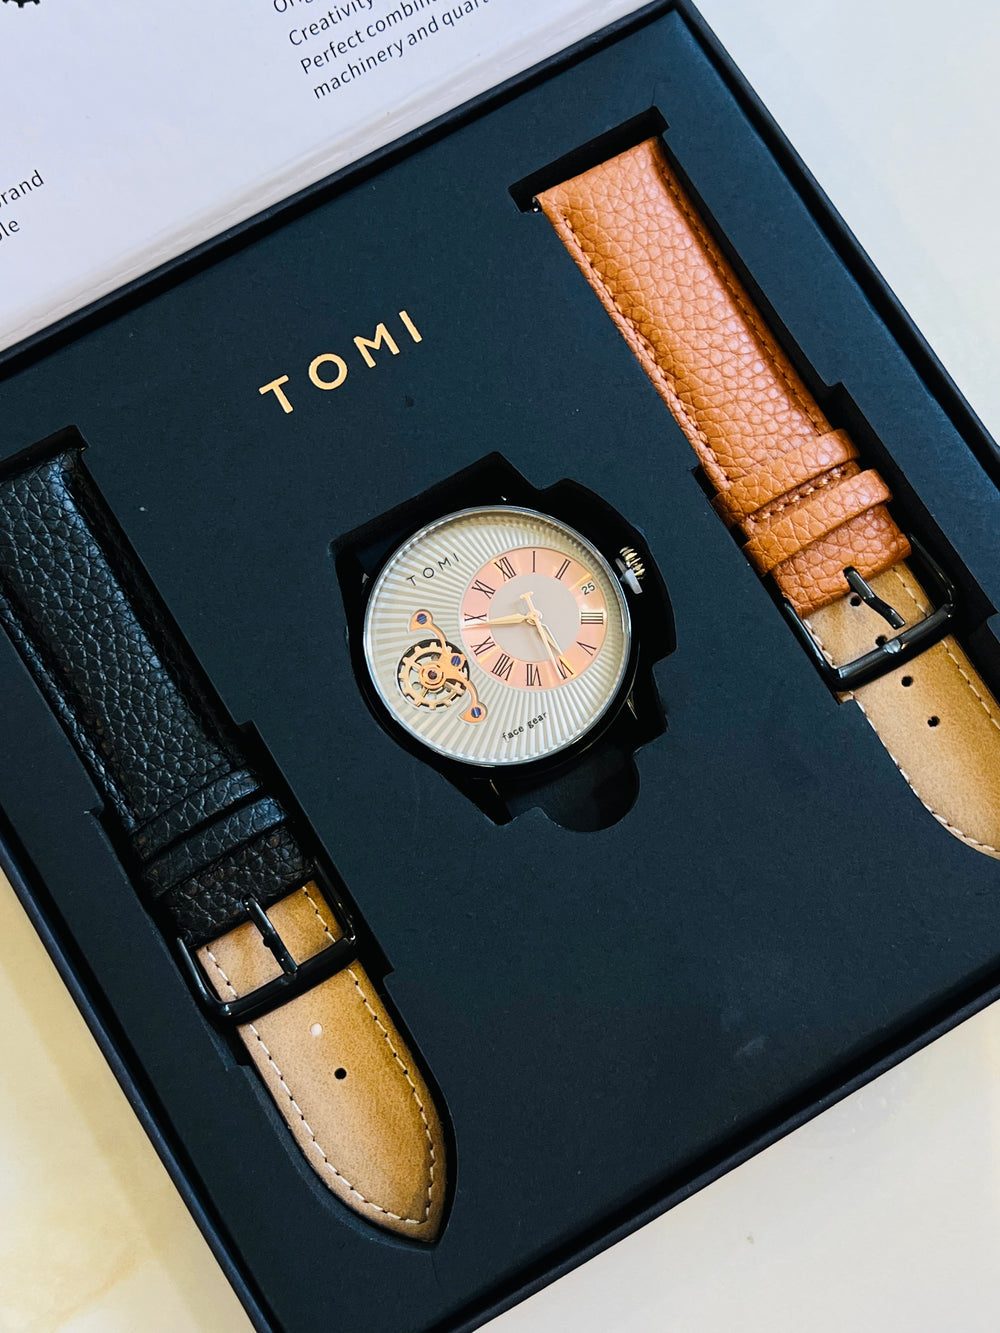 TOMI T-104 Face Gear Dual Strap Watch